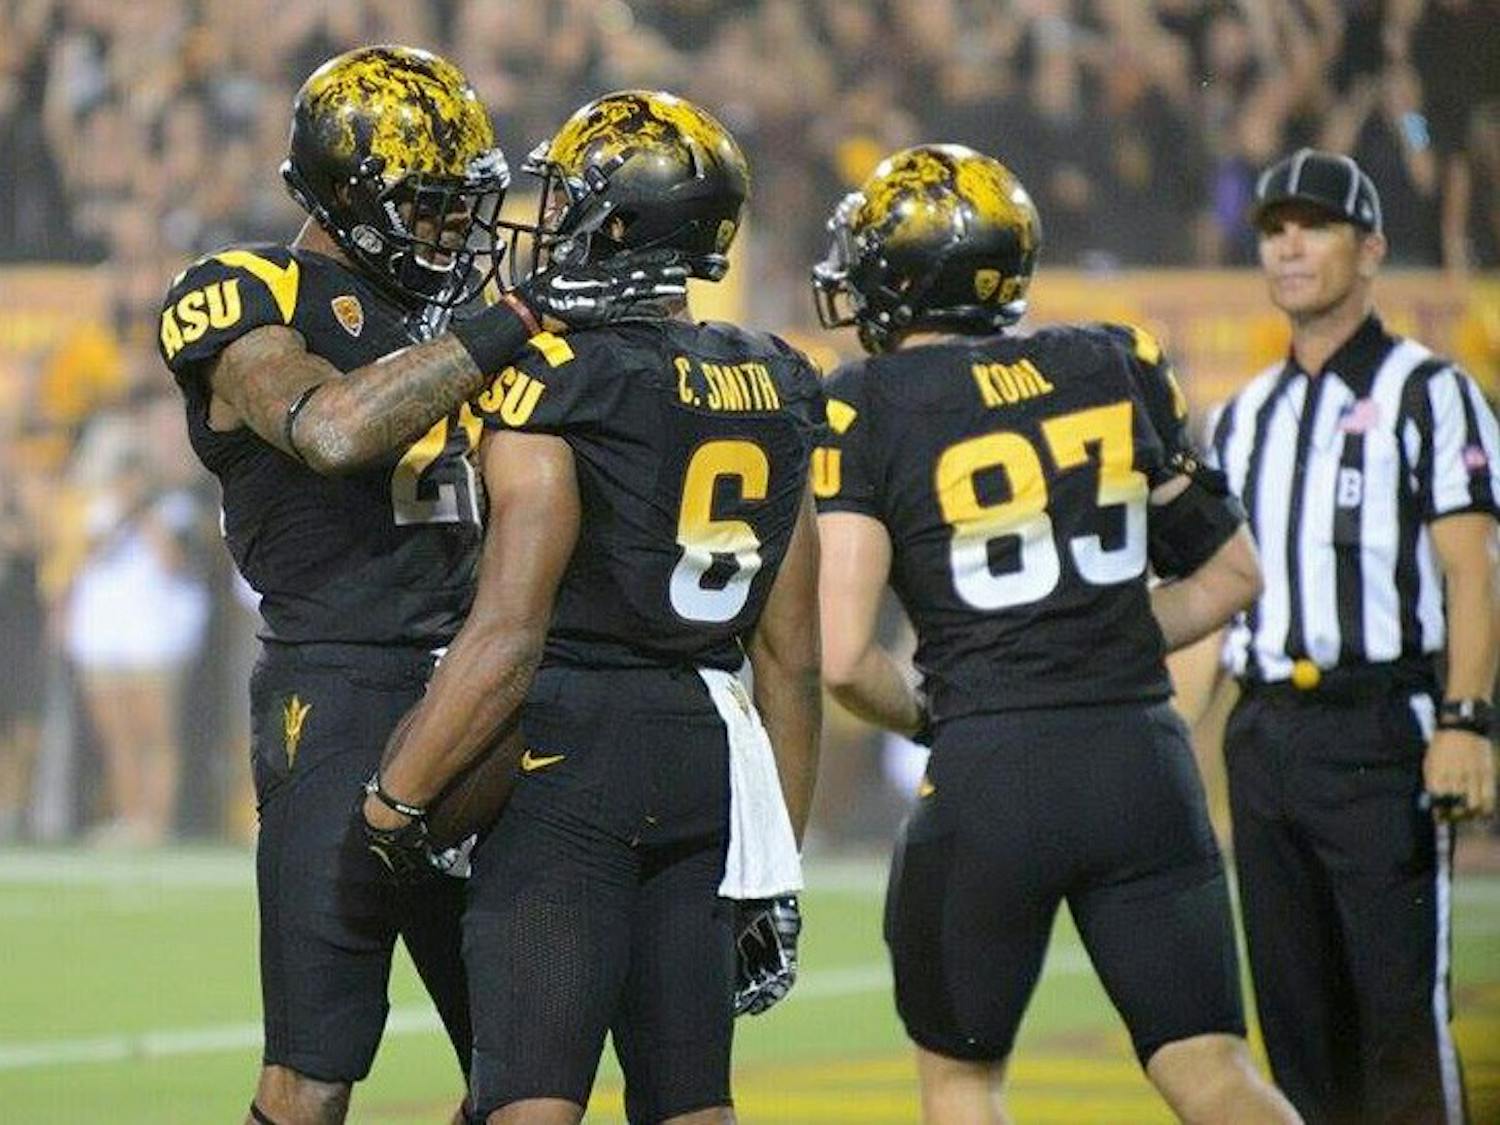 Redshirt junior receiver Jaelen Strong celebrates with sophomore receiver Cameron Smith after Smith caught a 29-yard pass from redshirt junior quarterback Mike Bercovici (Photo by Andrew Ybanez).